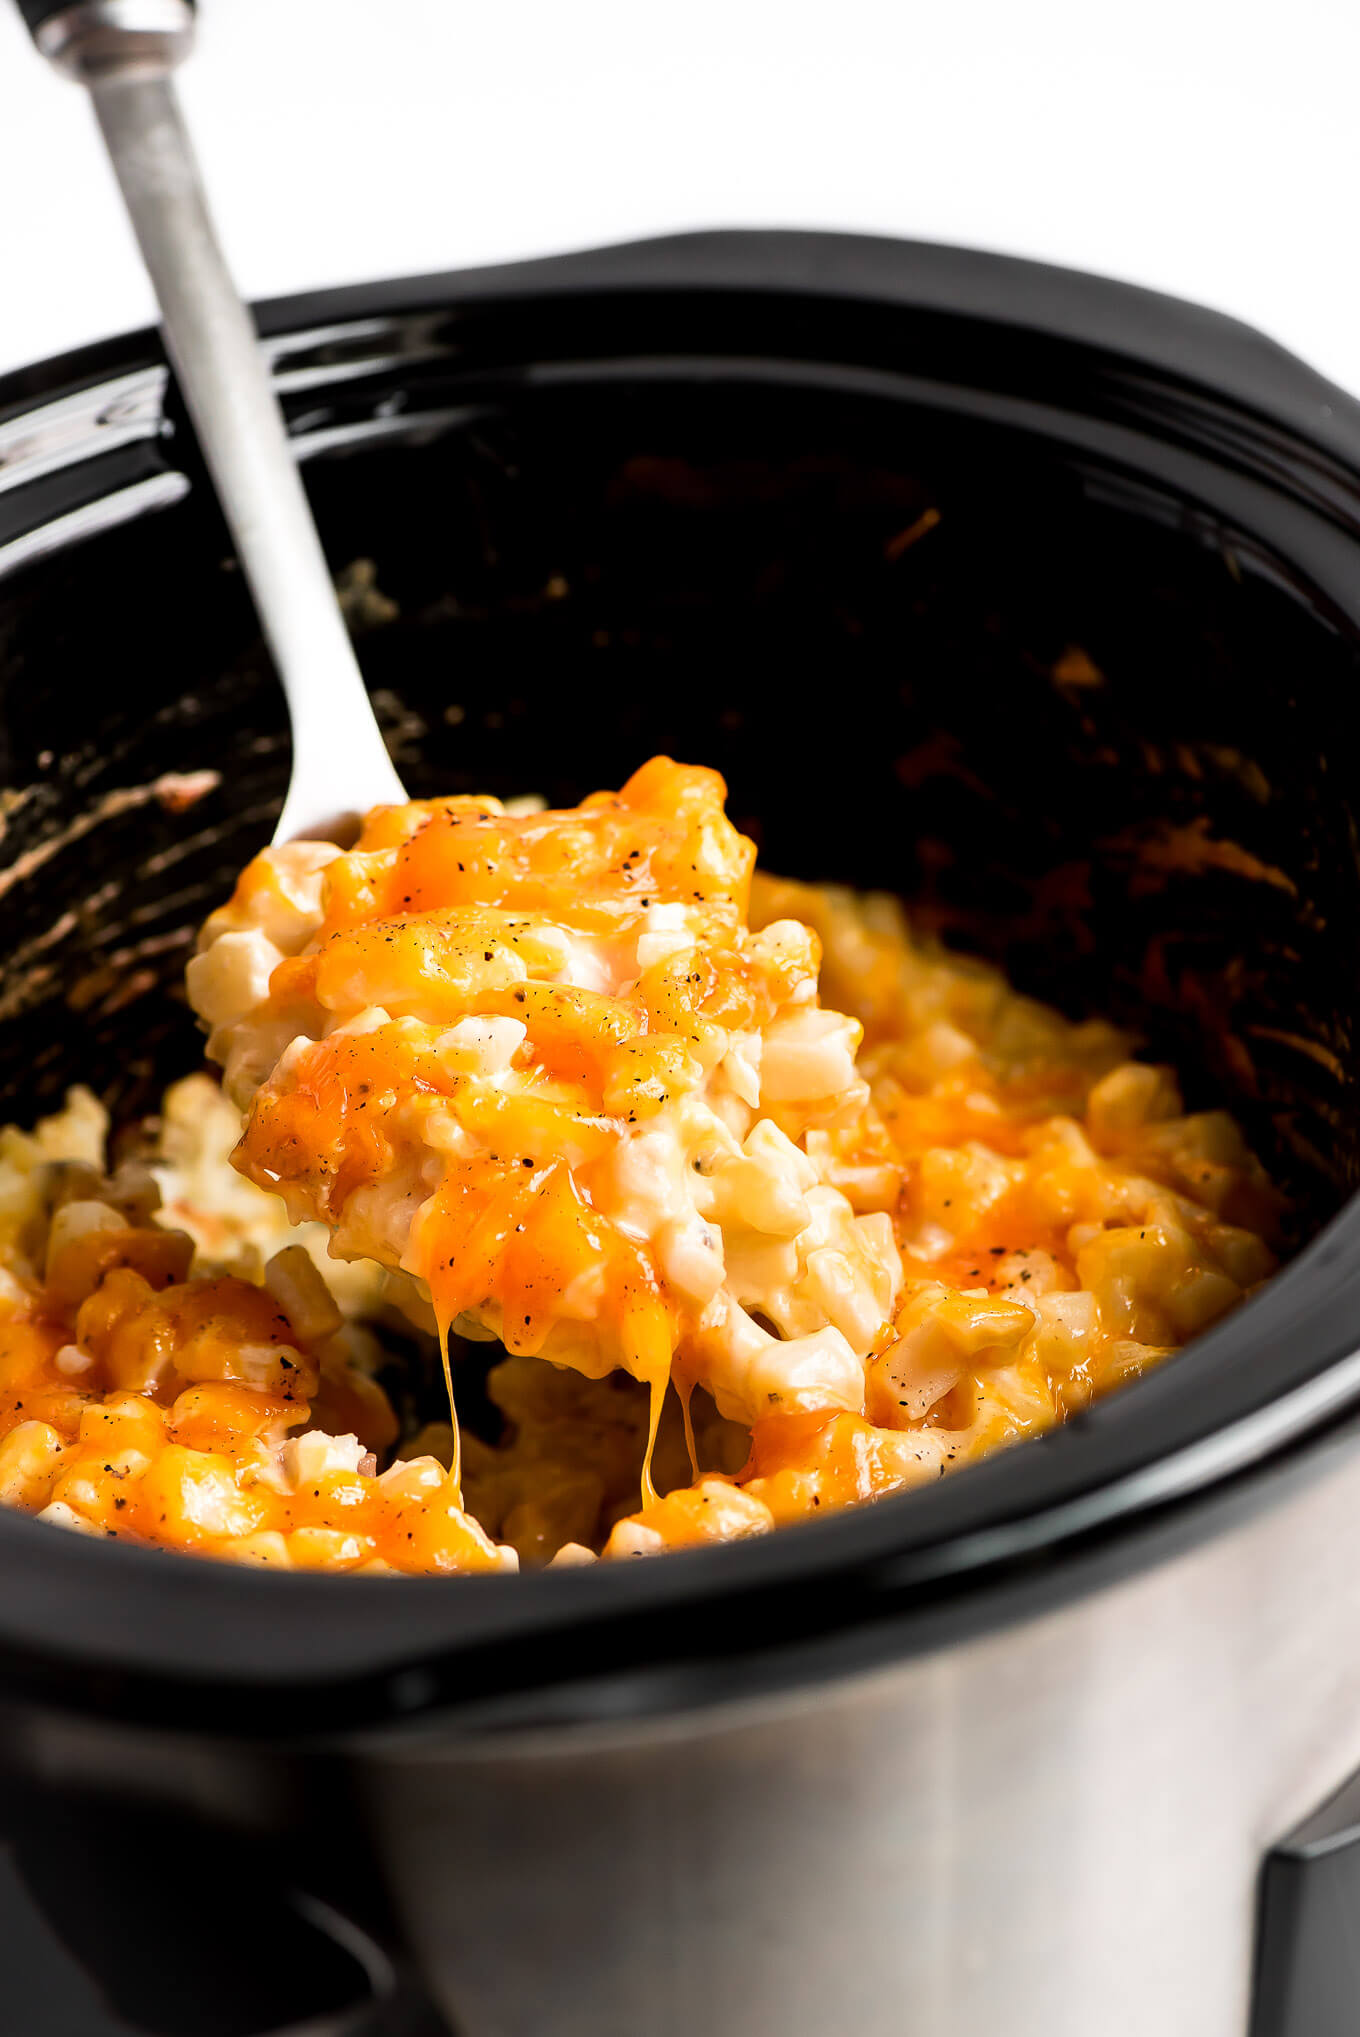 Lifing out a spoonful of Slow Cooker Cheesy Potatoes.